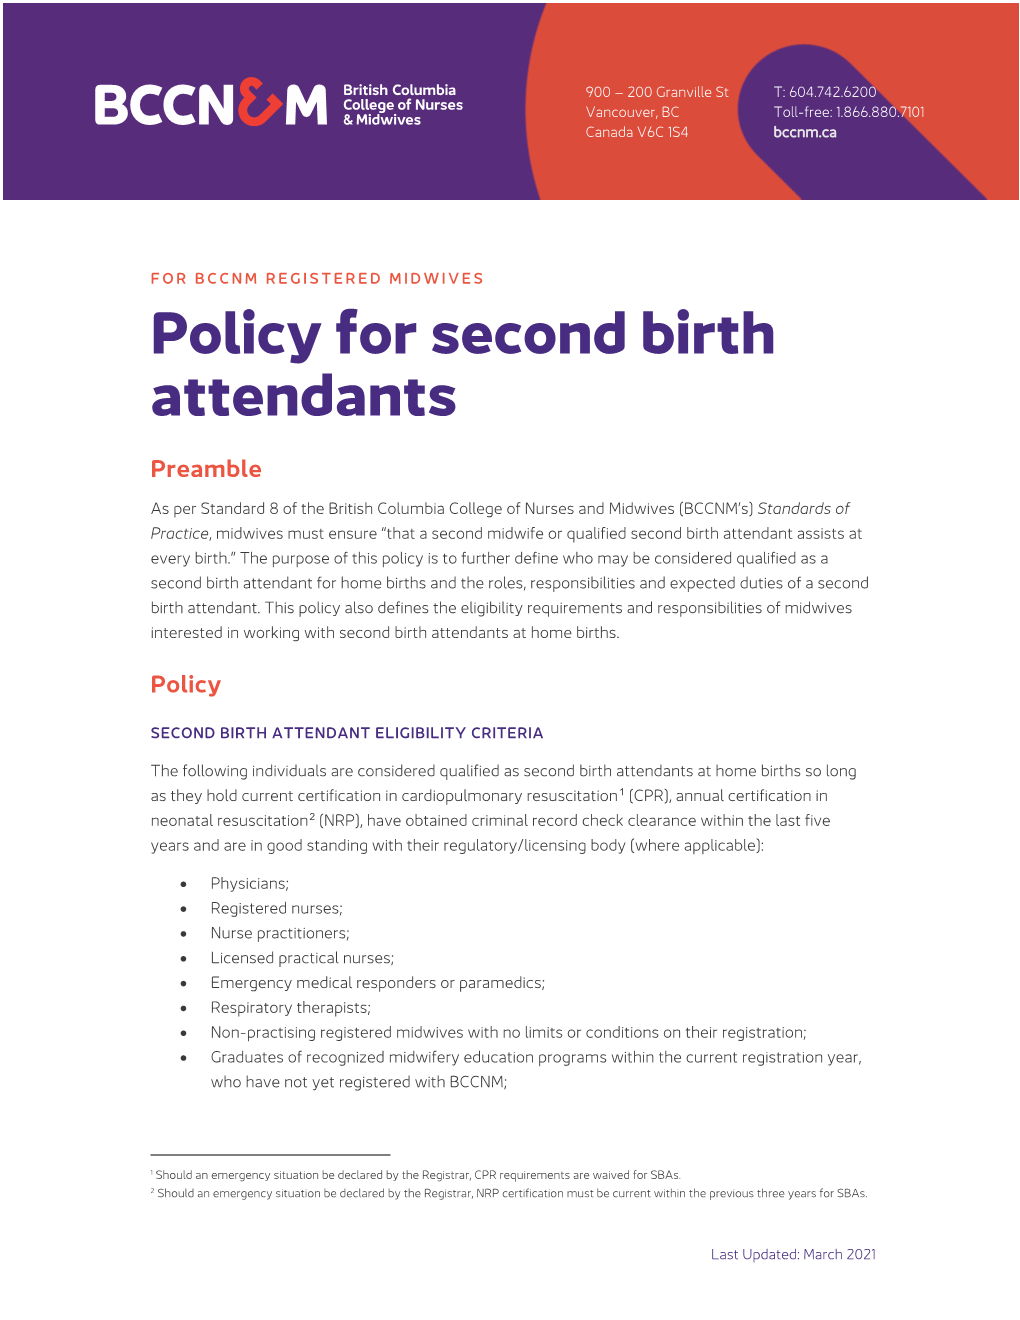 Policy for Second Birth Attendants